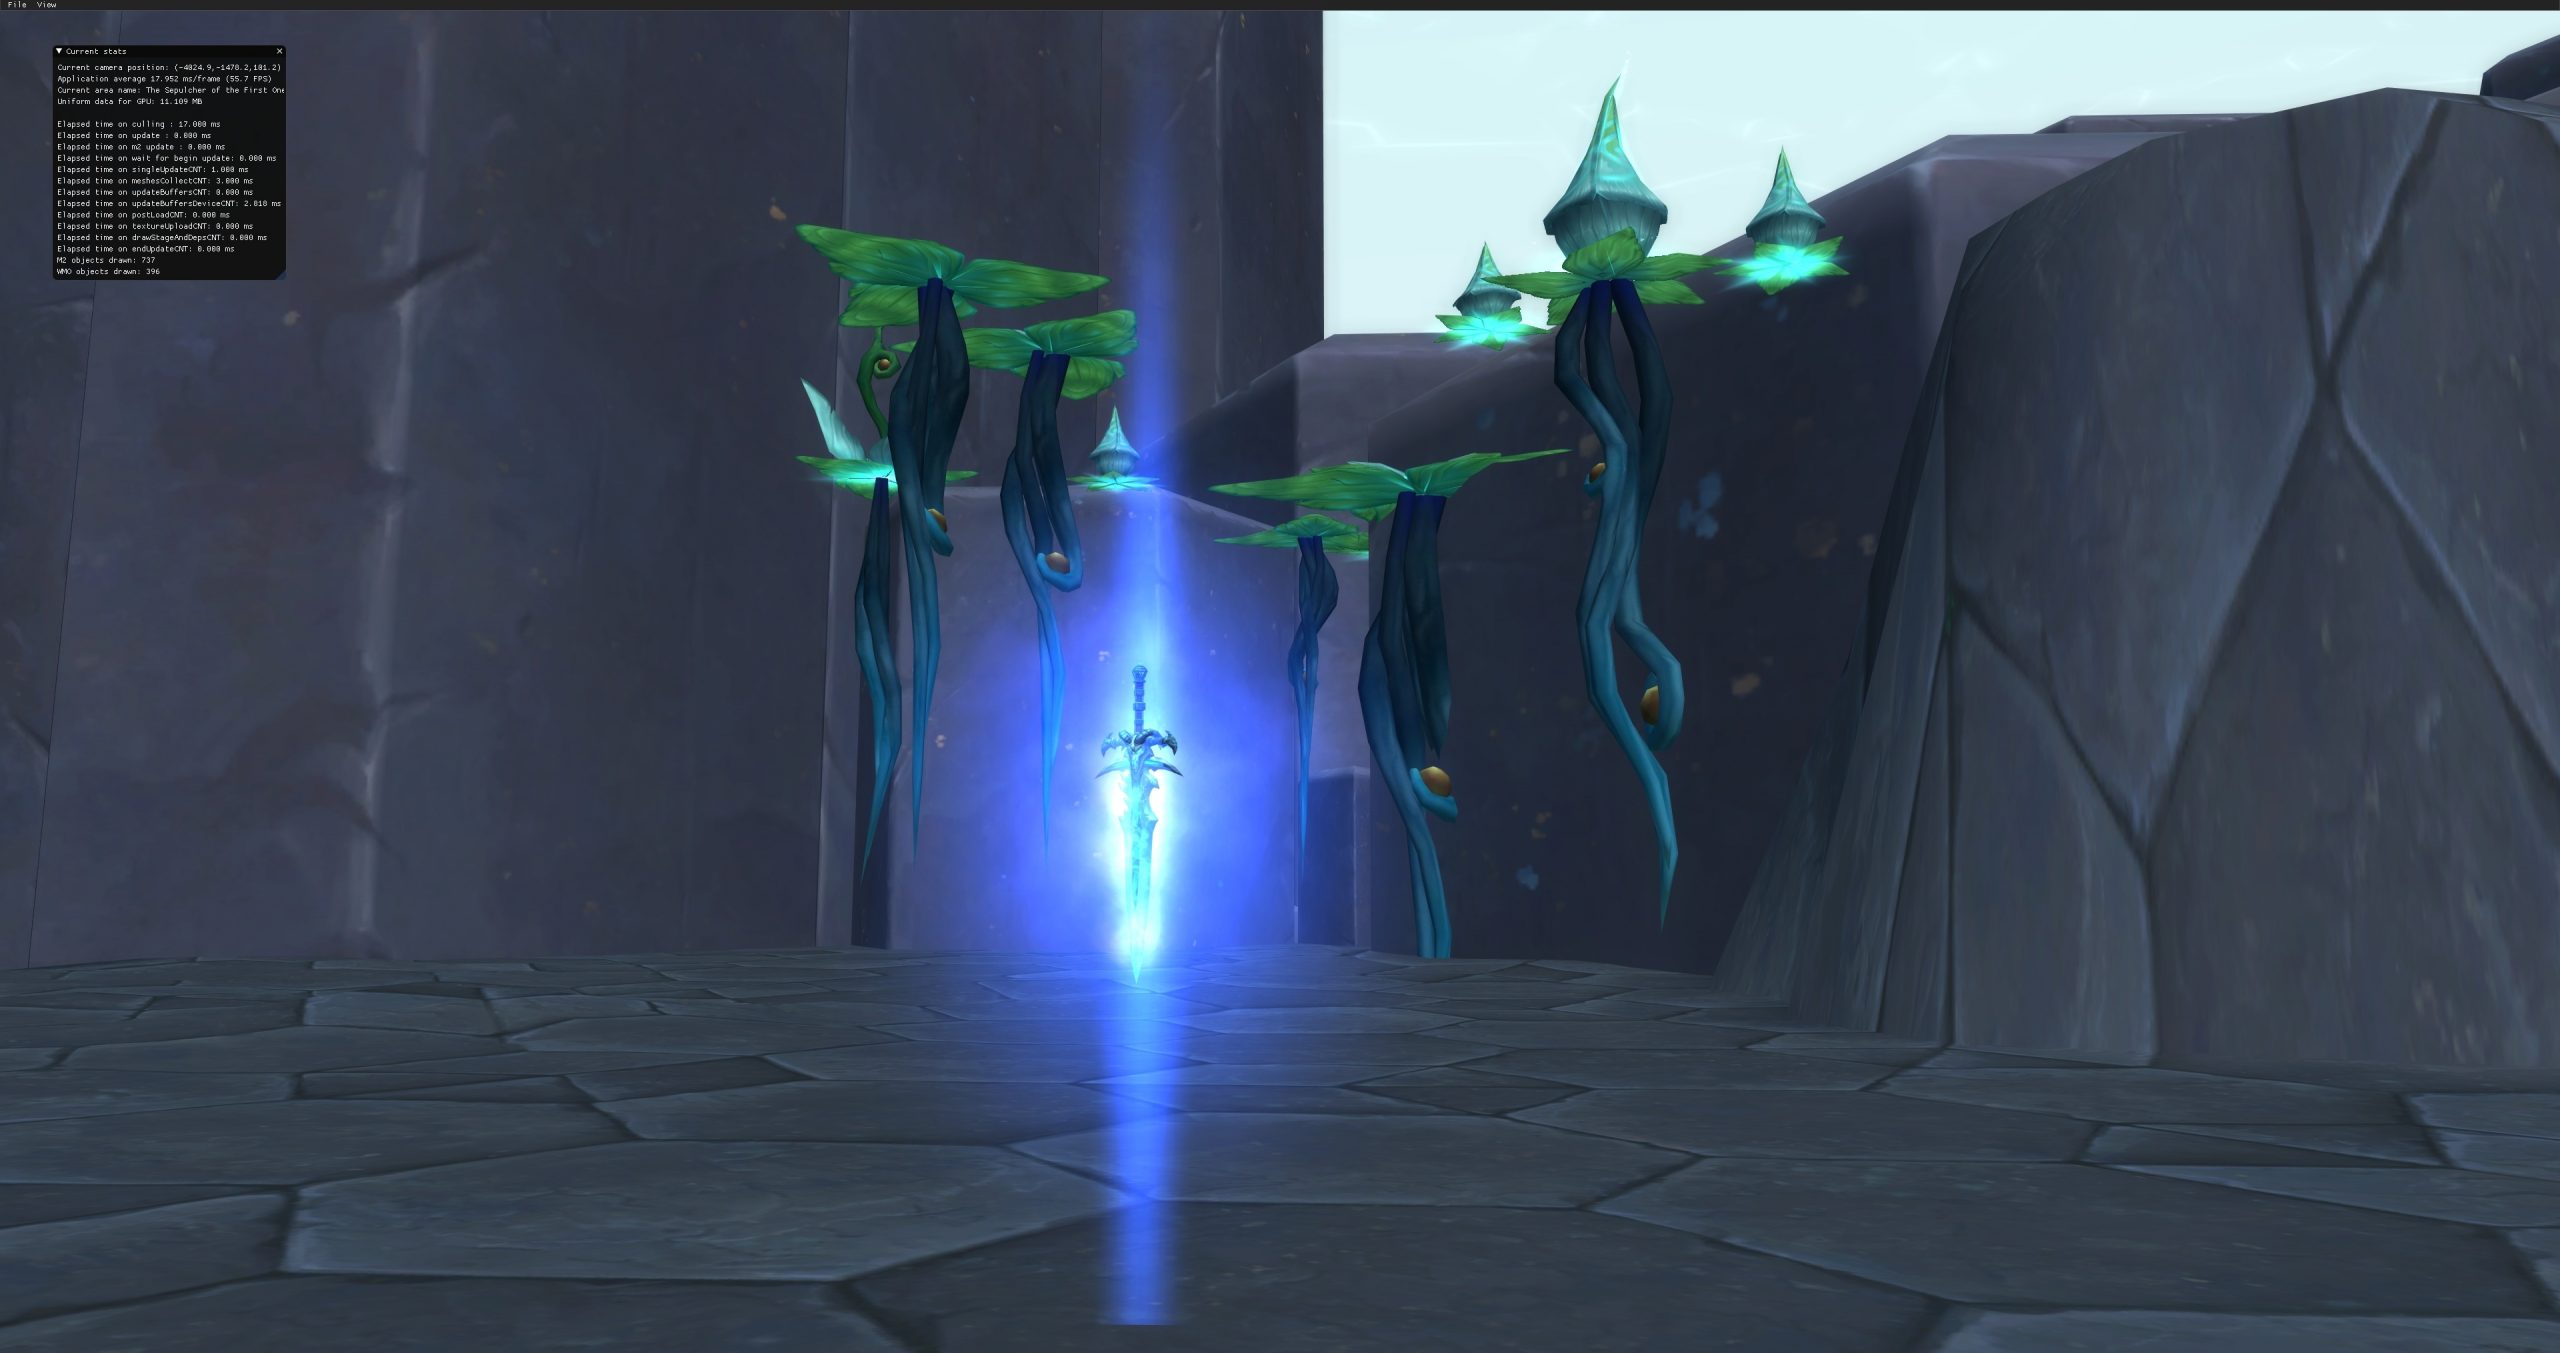 Sepulcher Of the First Ones Raid contains mechanics from The Lich King Encounter